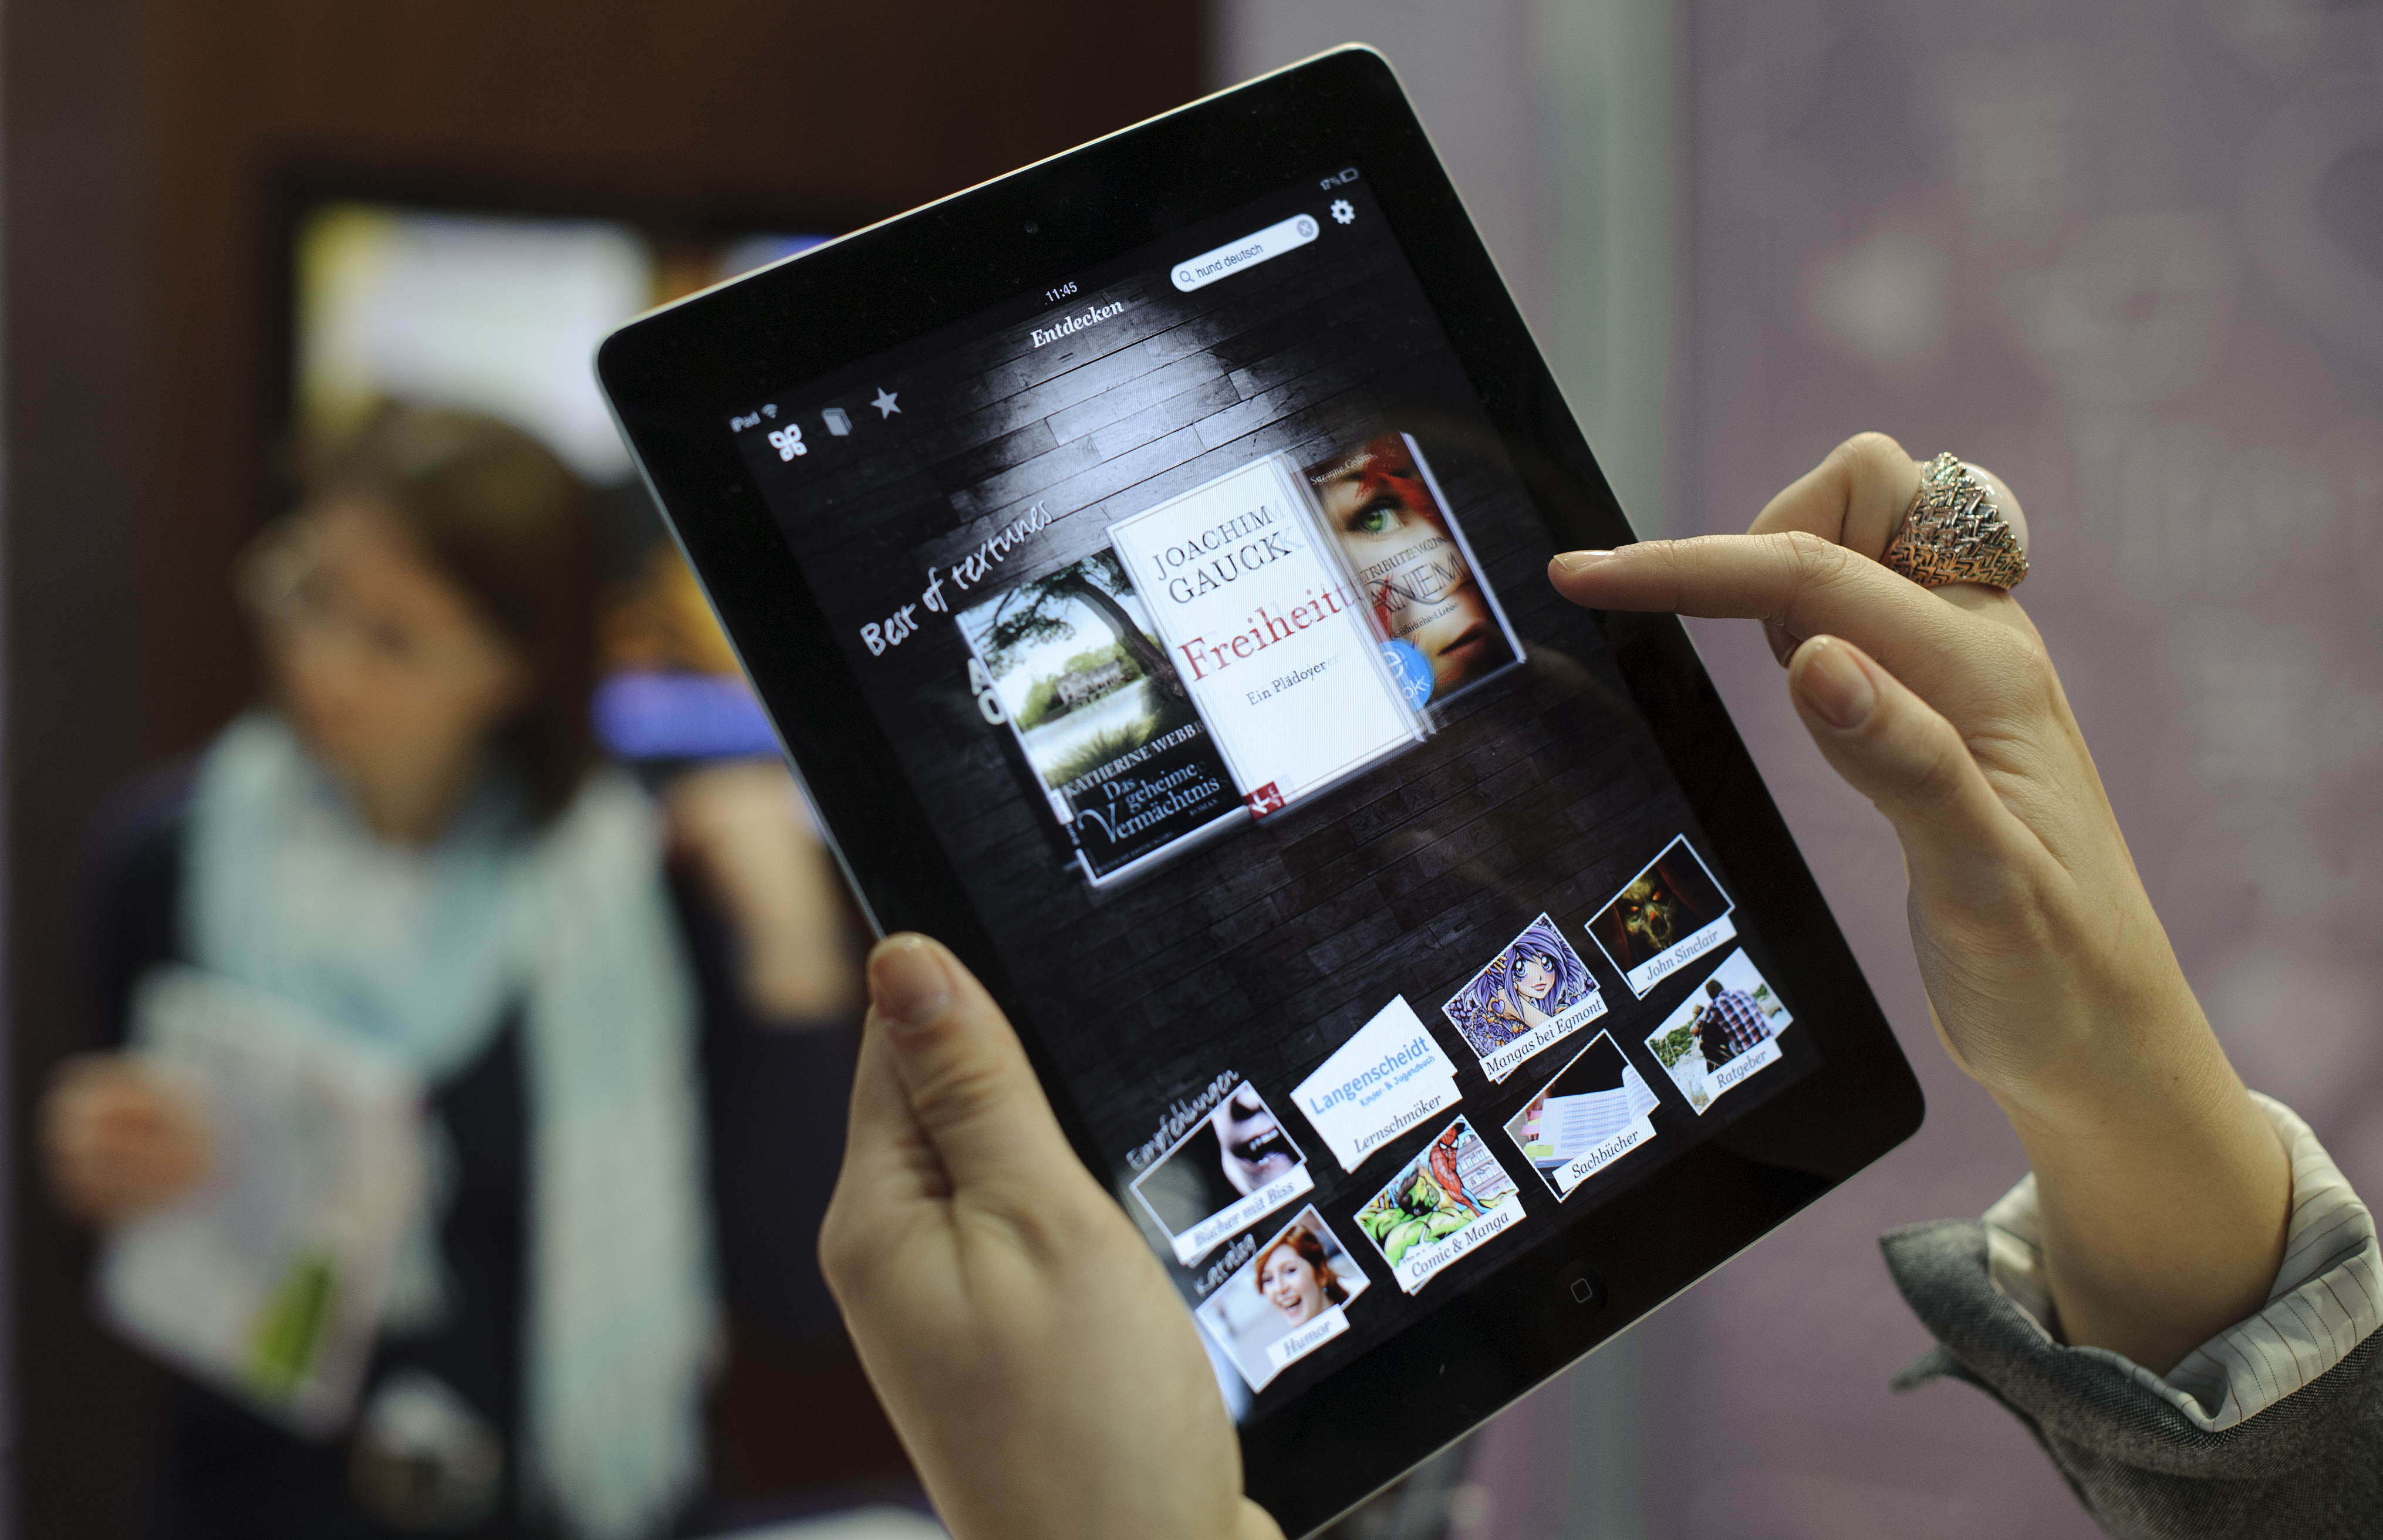 Fair goers try out the eBook reader app on an Apple iPad at a book fair on March 15, 2012. (Robert Michael—AFP/Getty Images)